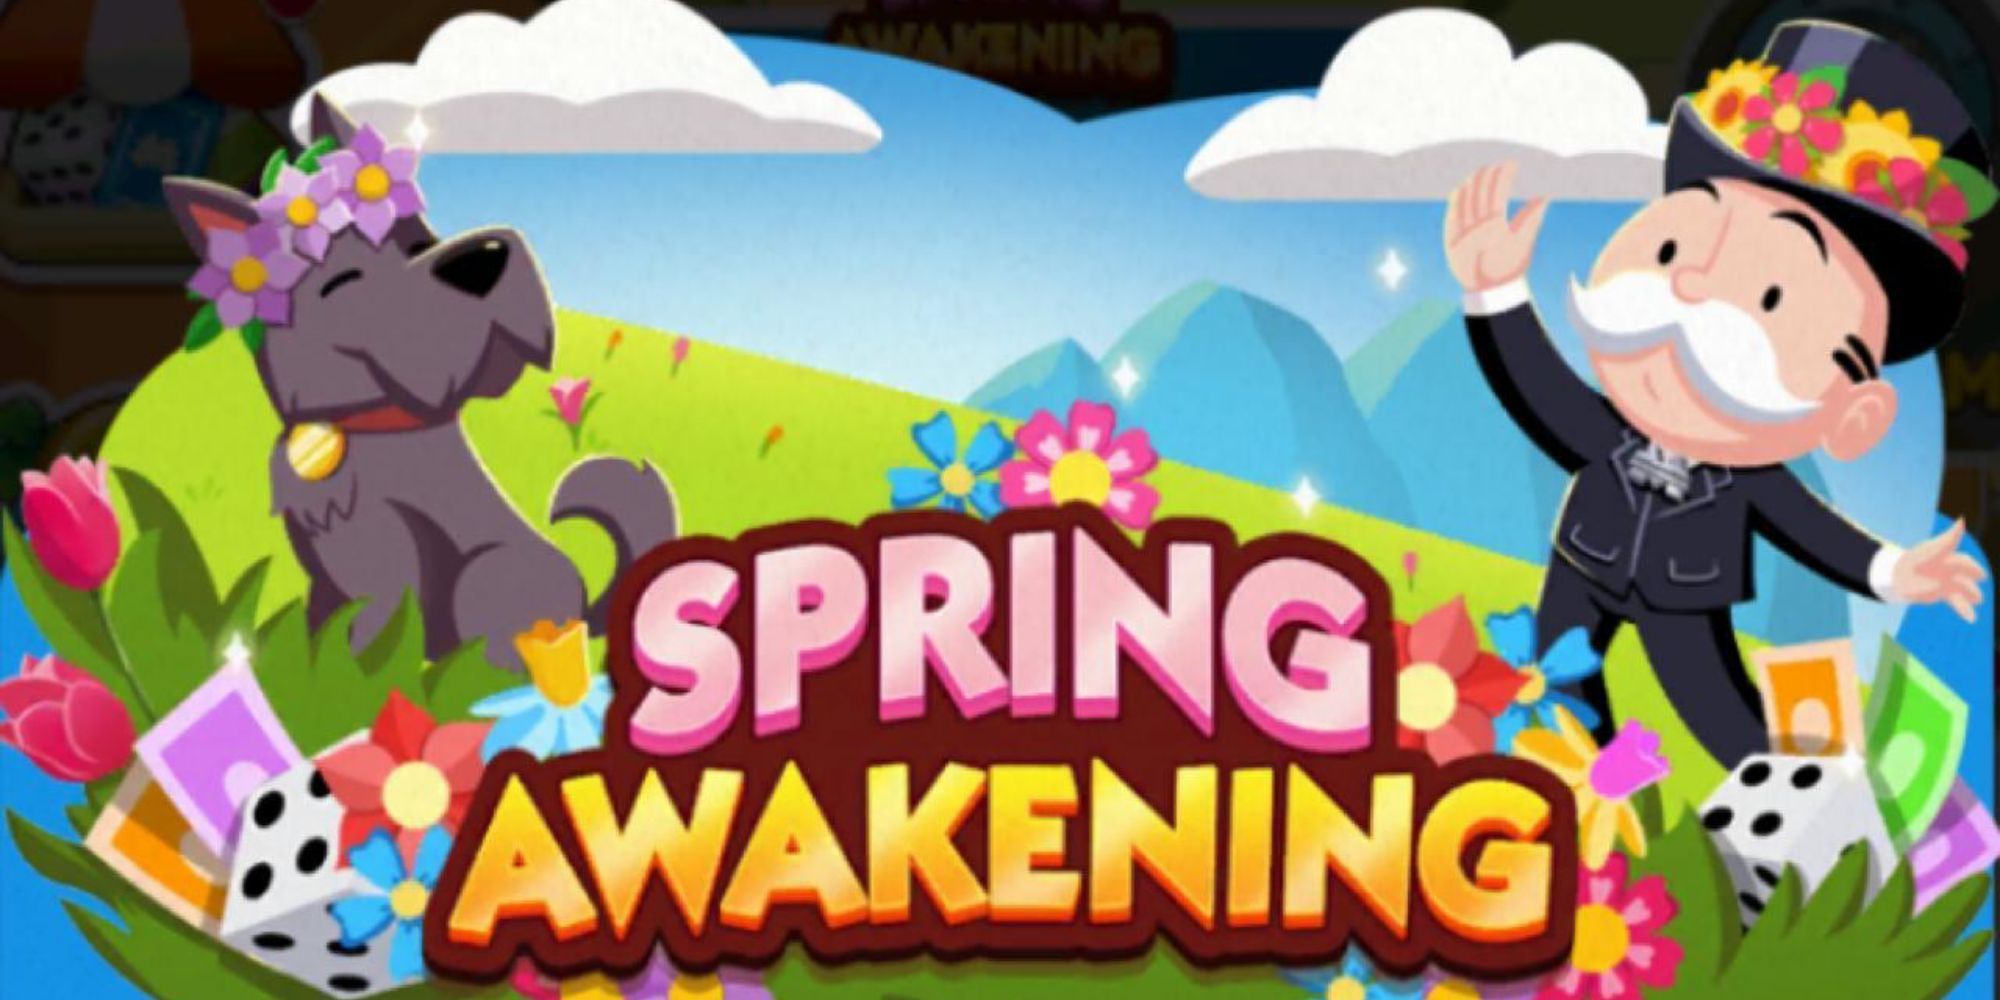 Mr. Monopoly and his dog in Spring Awakening event banner in Monopoly Go.